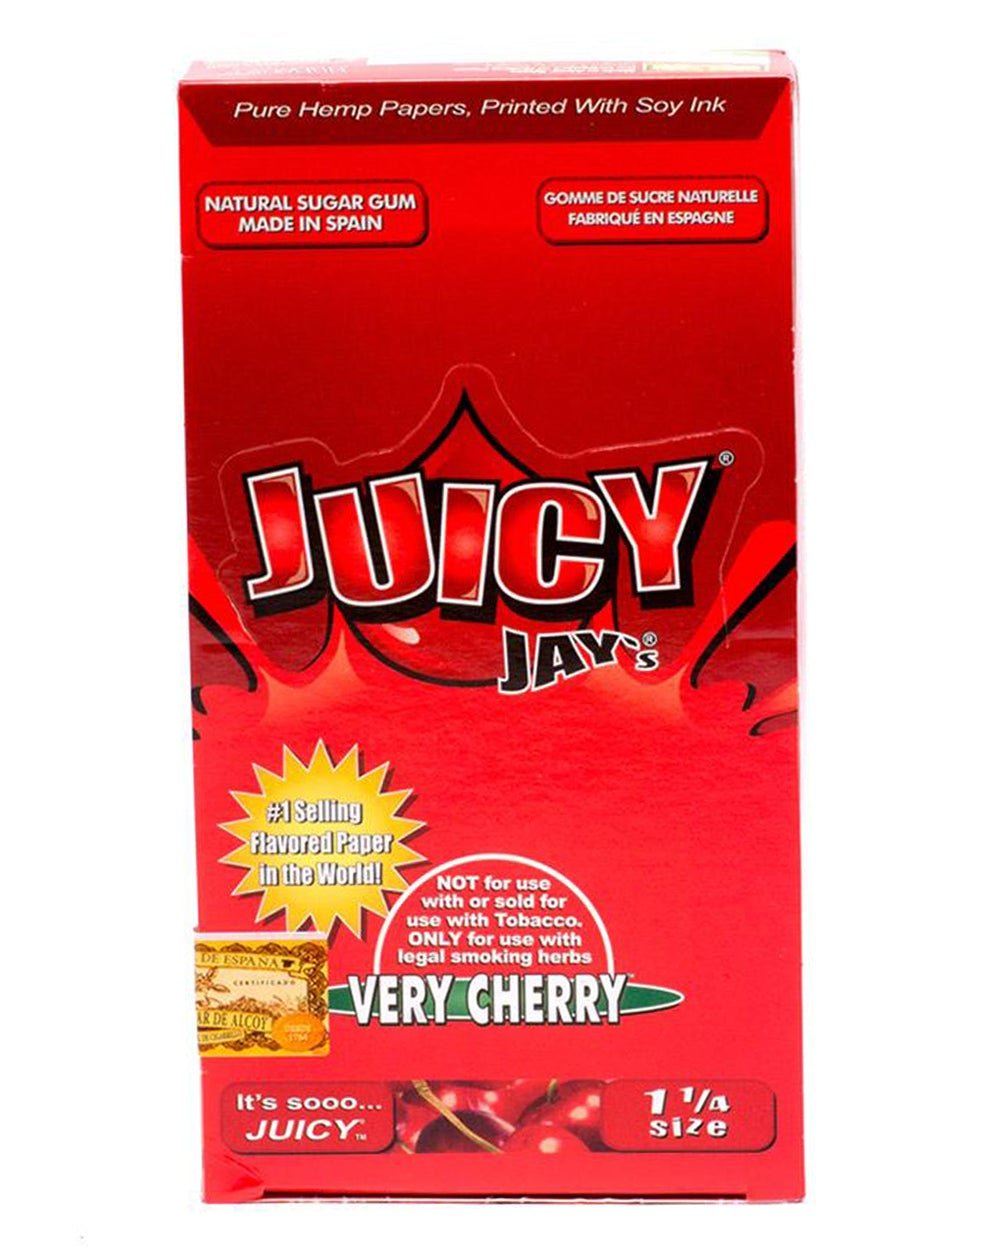 JUICY JAY'S | 'Retail Display' 1 1/4 Size Hemp Rolling Papers | 76mm - Very Cherry - 24 Count - 2